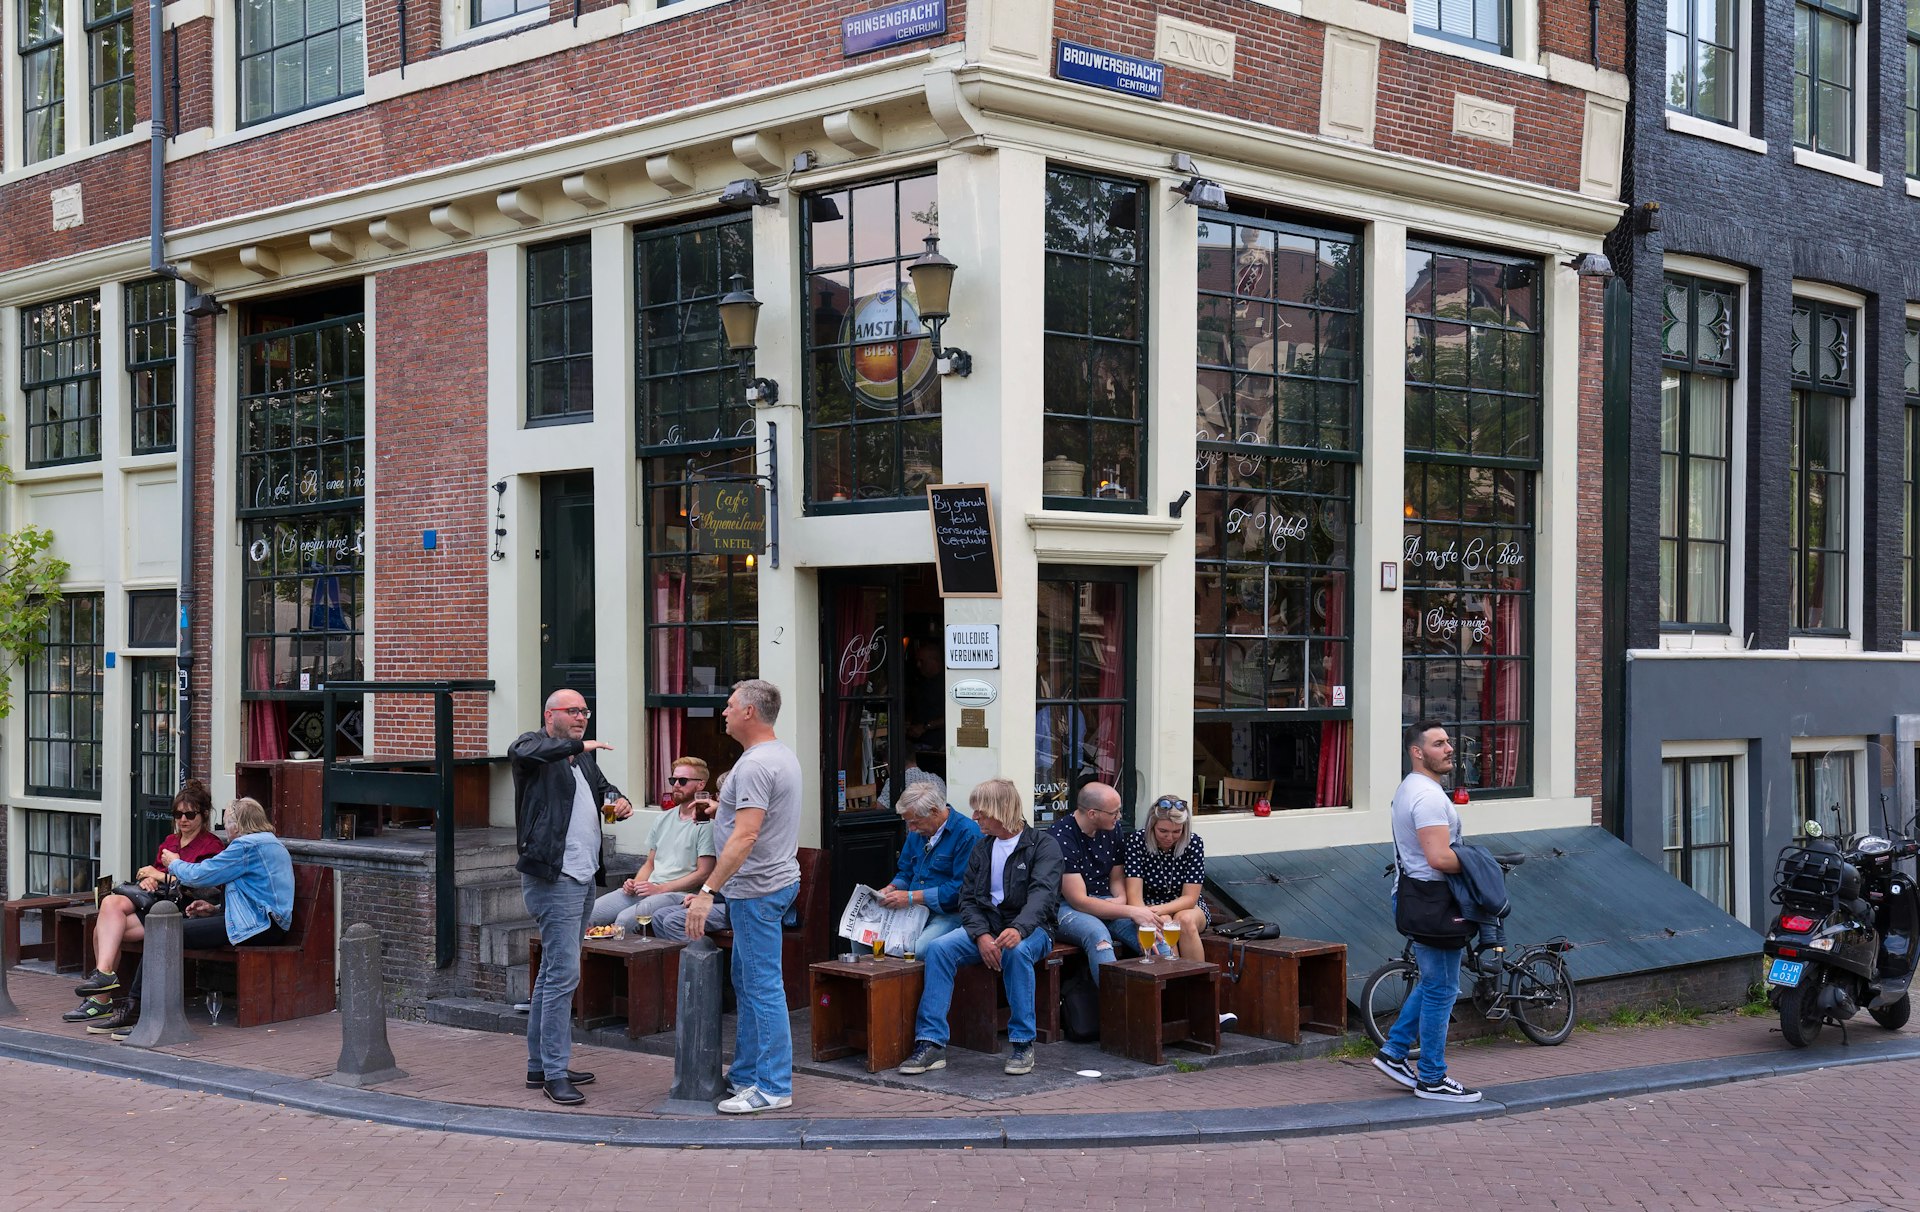 Tourists and local people enjoy the dutch cafe Papeneiland in central Amsterdam, the Netherlands